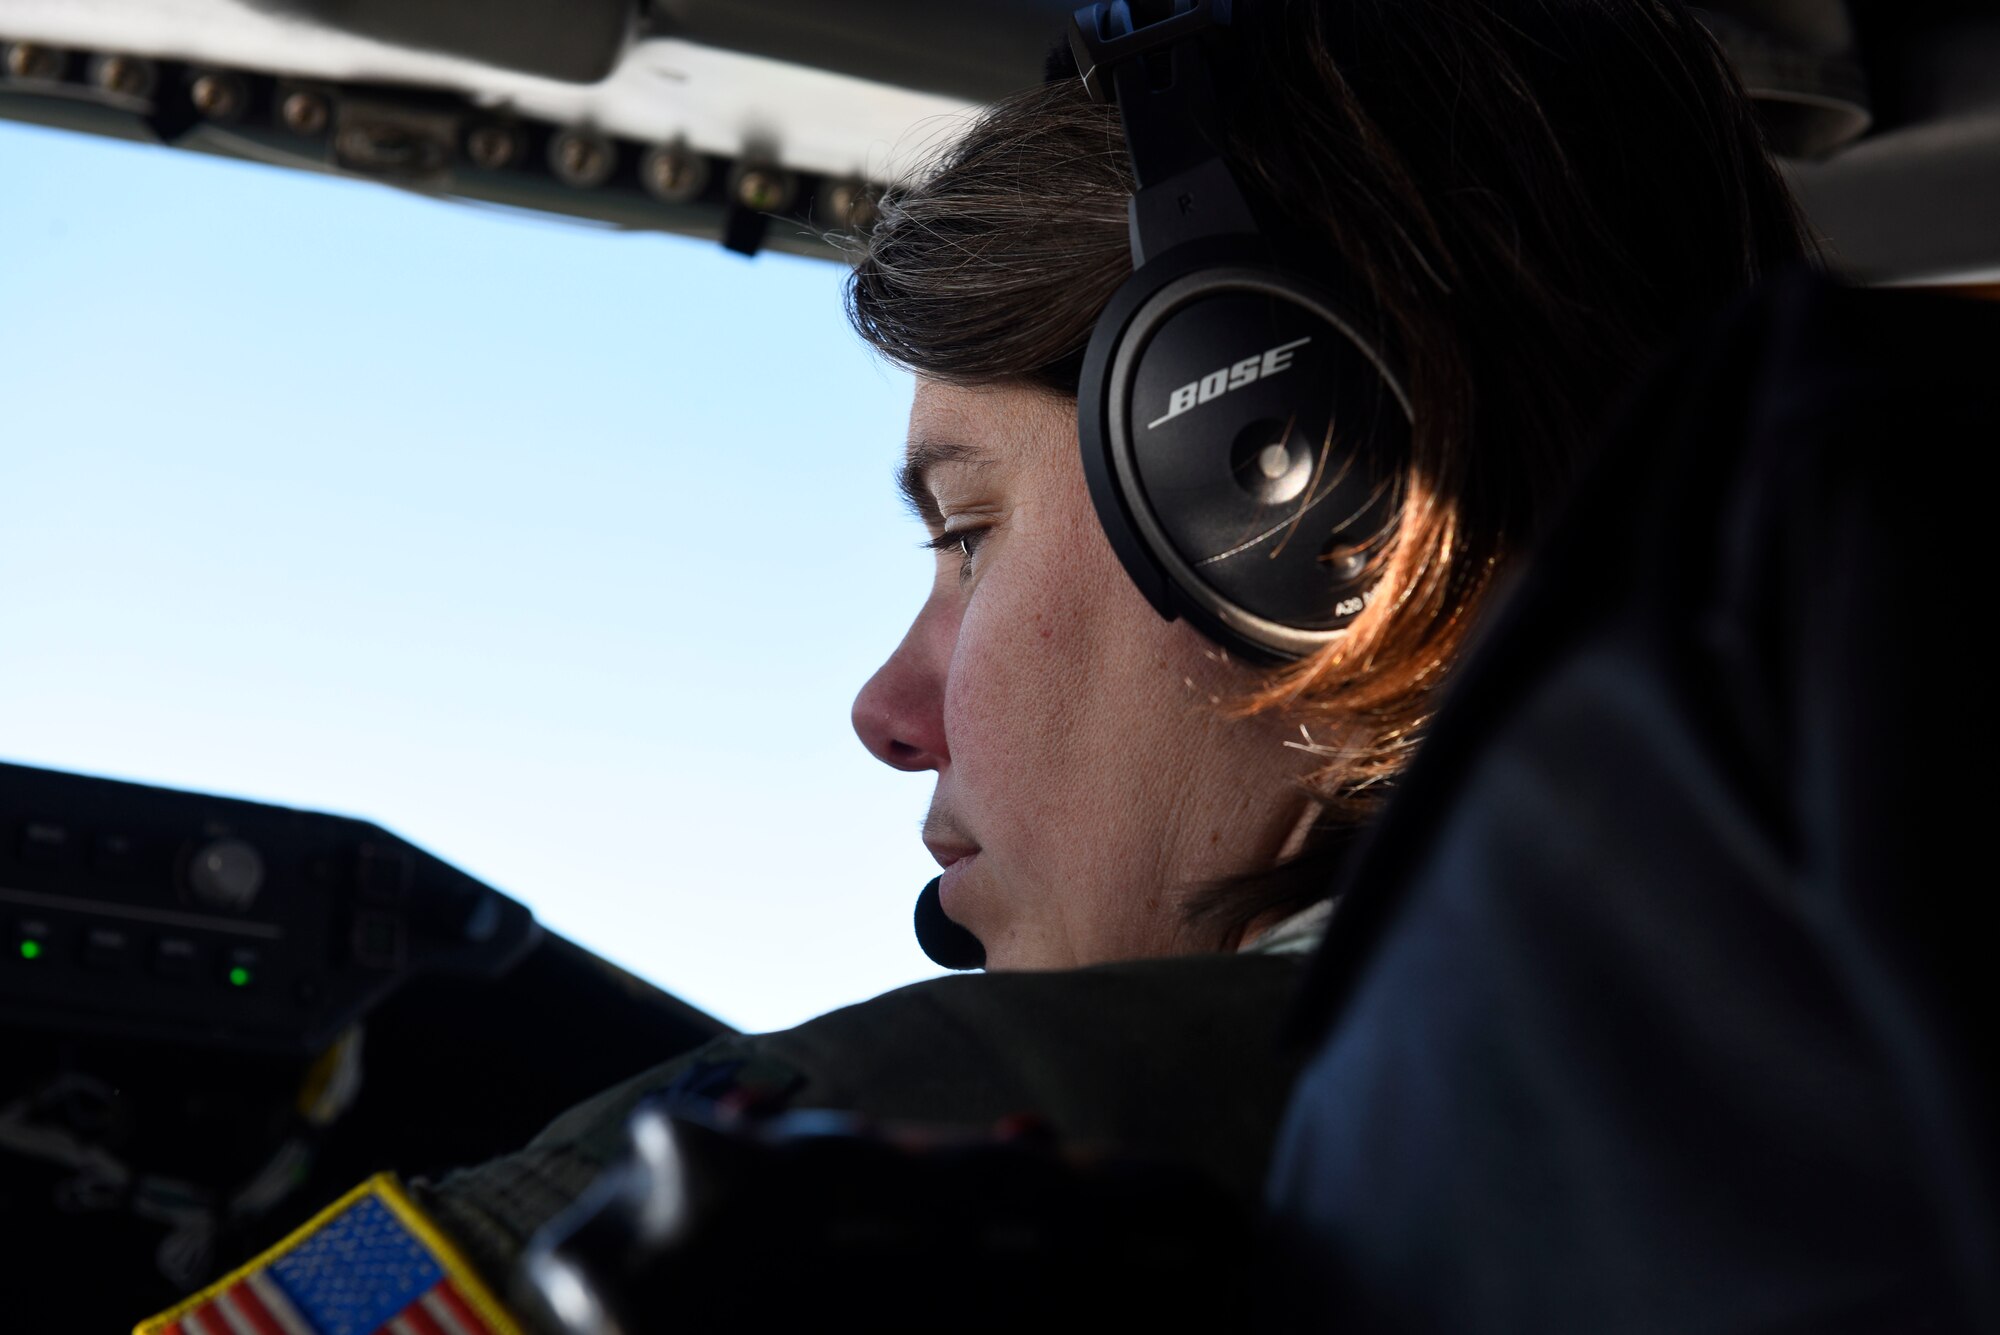 U.S. Air Force Lt. Col. Cindy Dawson, 97th Air Refueling Squadron commander, monitors aircraft instruments during the first mission for the 97th ARS as a squadron over the skies of Washington, Jan. 13, 2019. With success of the 97th ARS’ first mission as a squadron, Team Fairchild can expand its Global Reach mission, enhancing its lethality and capabilities as the world’s largest air refueling wing. (U.S. Air Force photo by Senior Airman Lawrence Sena)